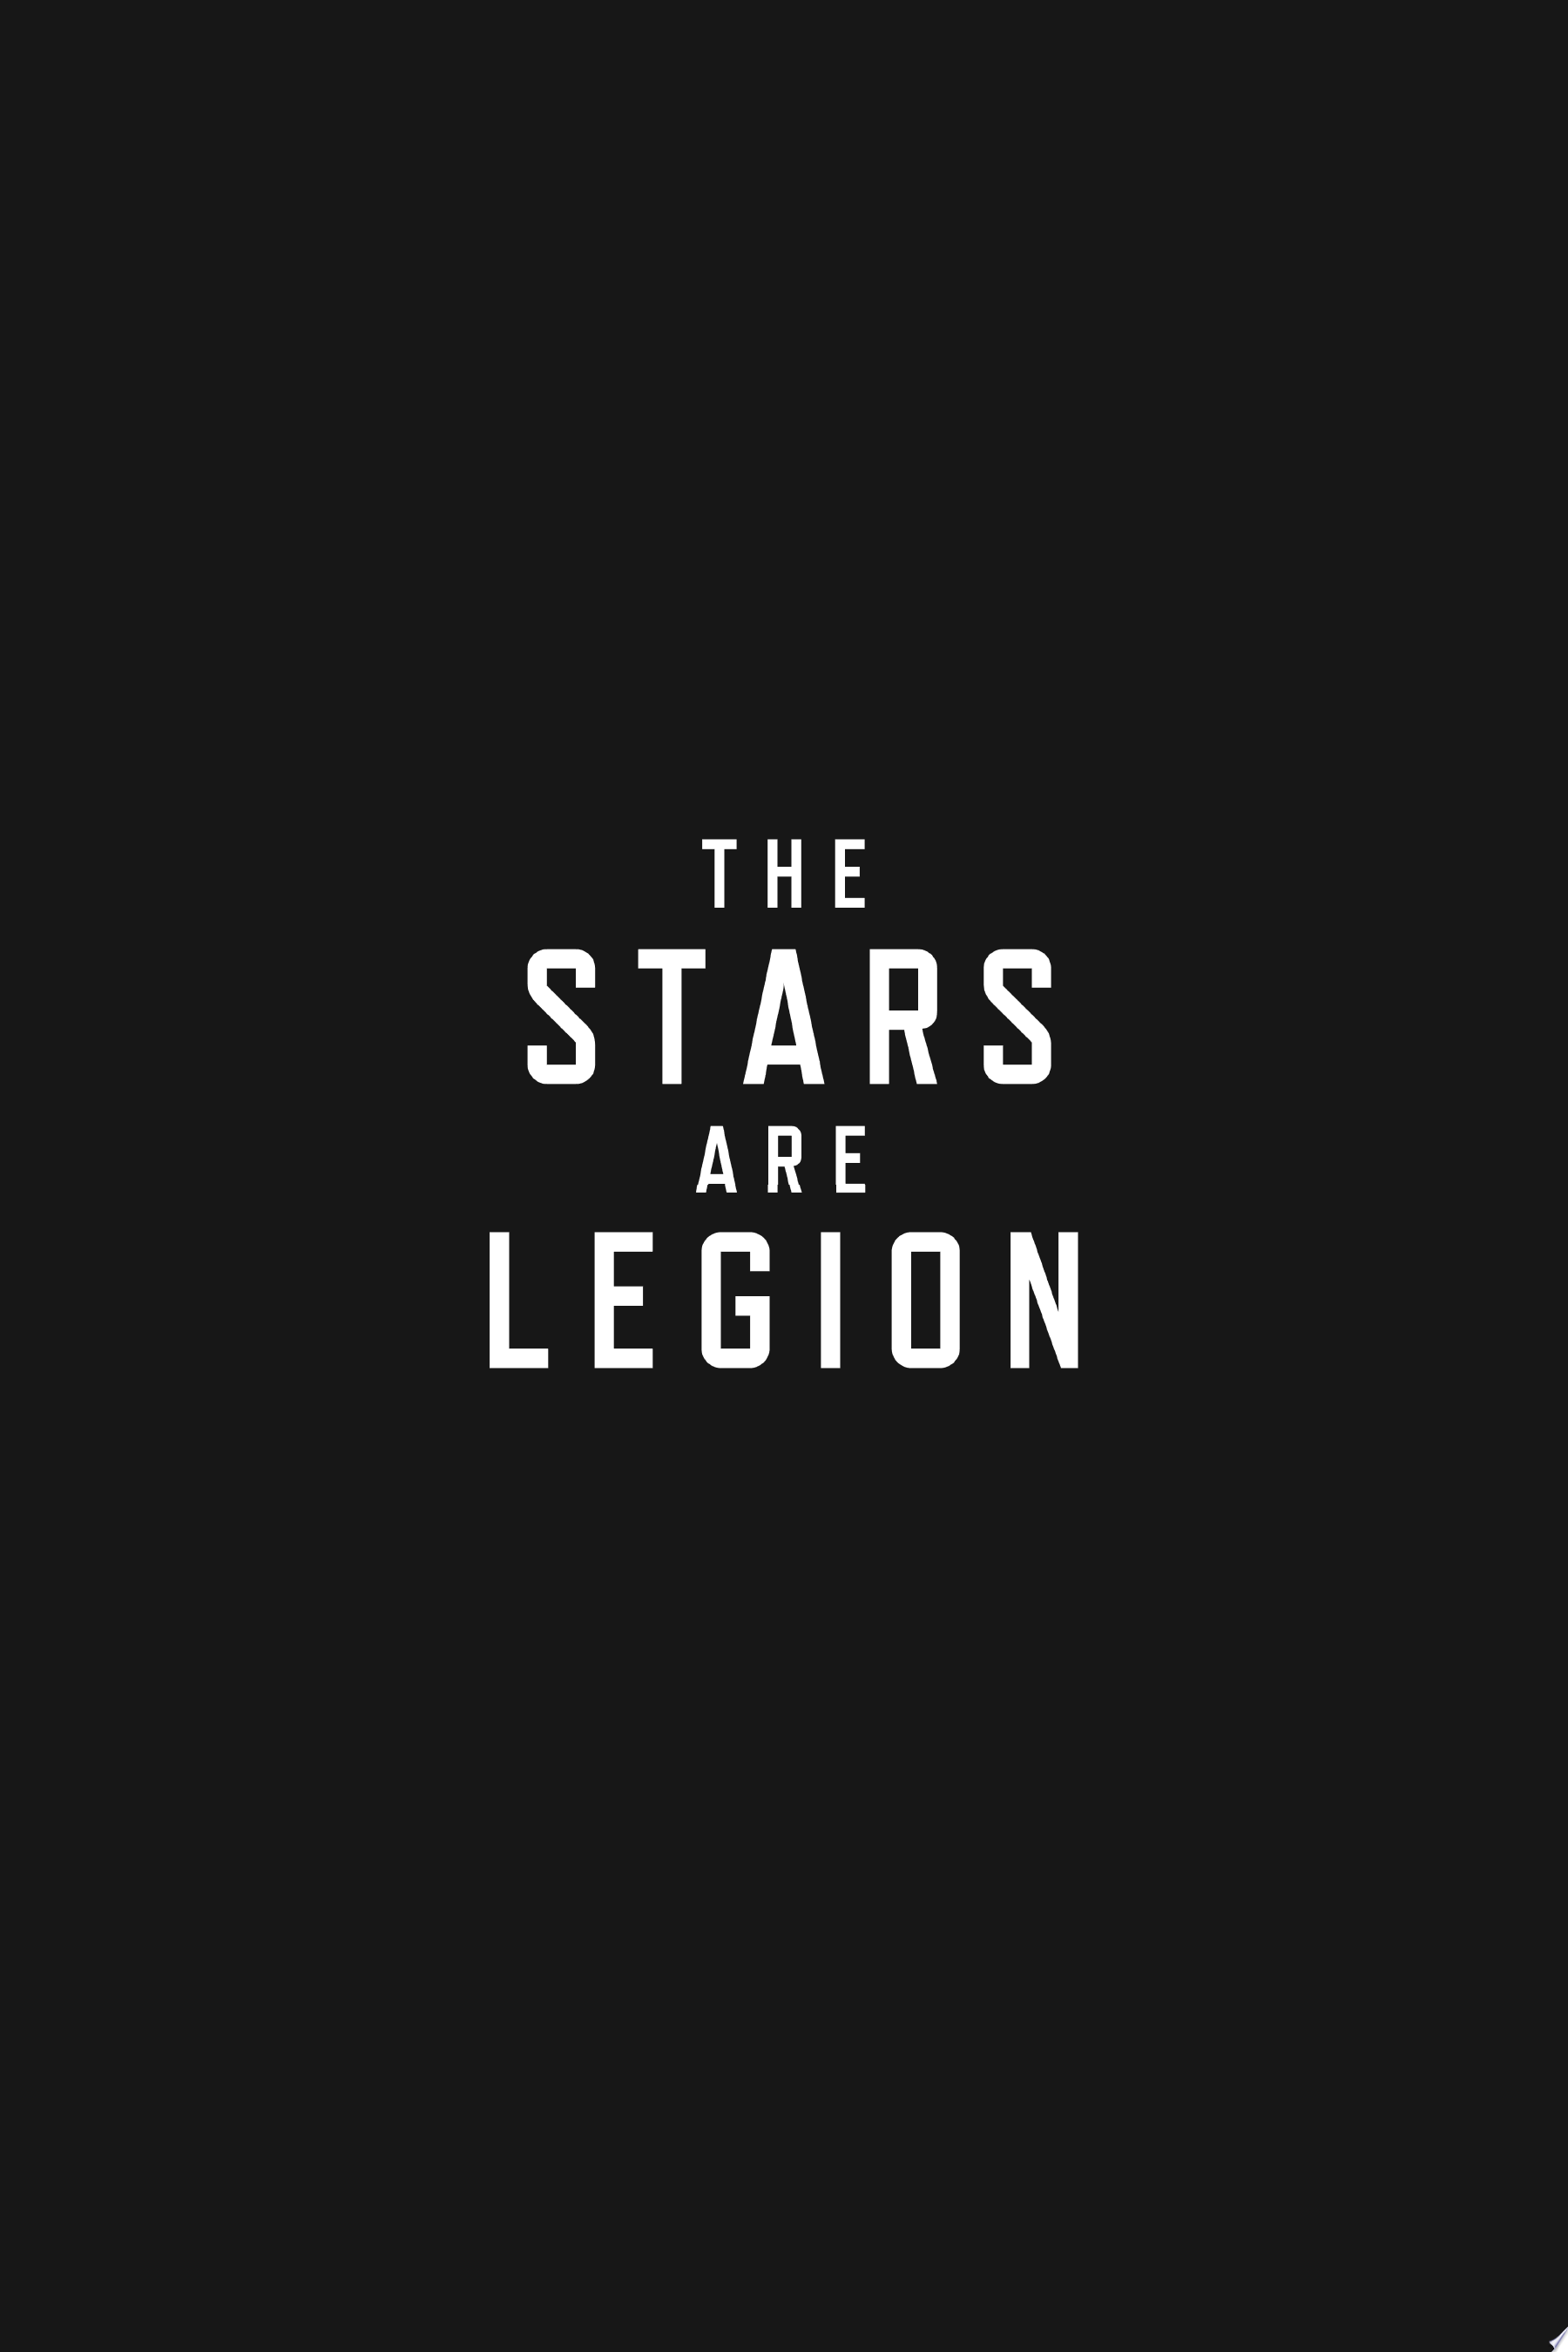 Image for "The Stars Are Legion"